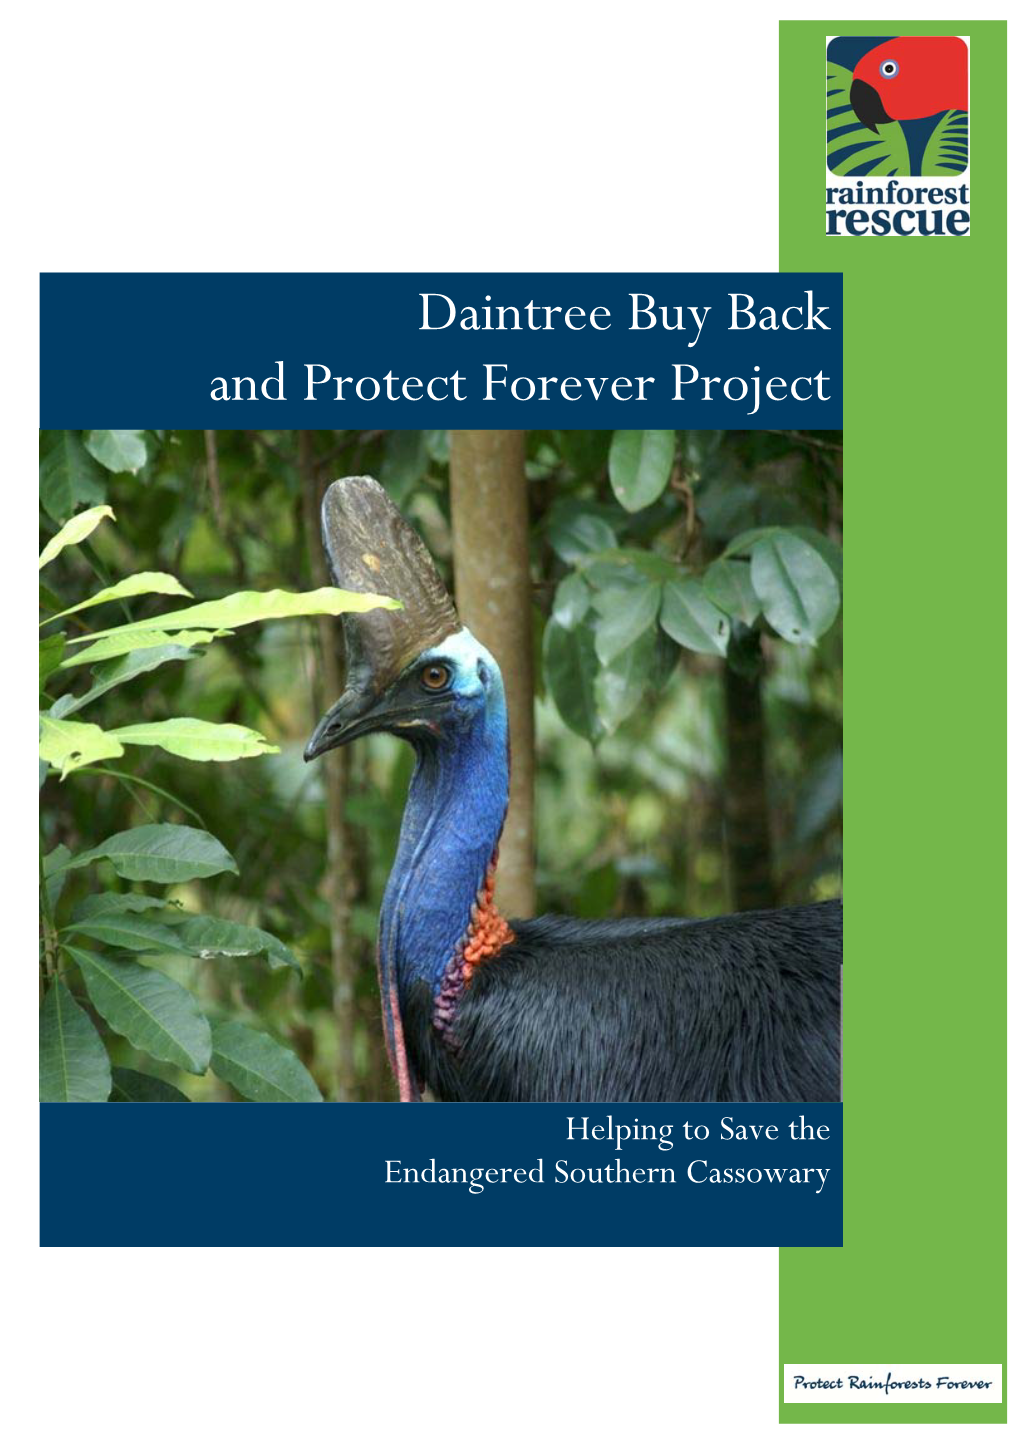 Daintree Buy Back and Protect Forever Project